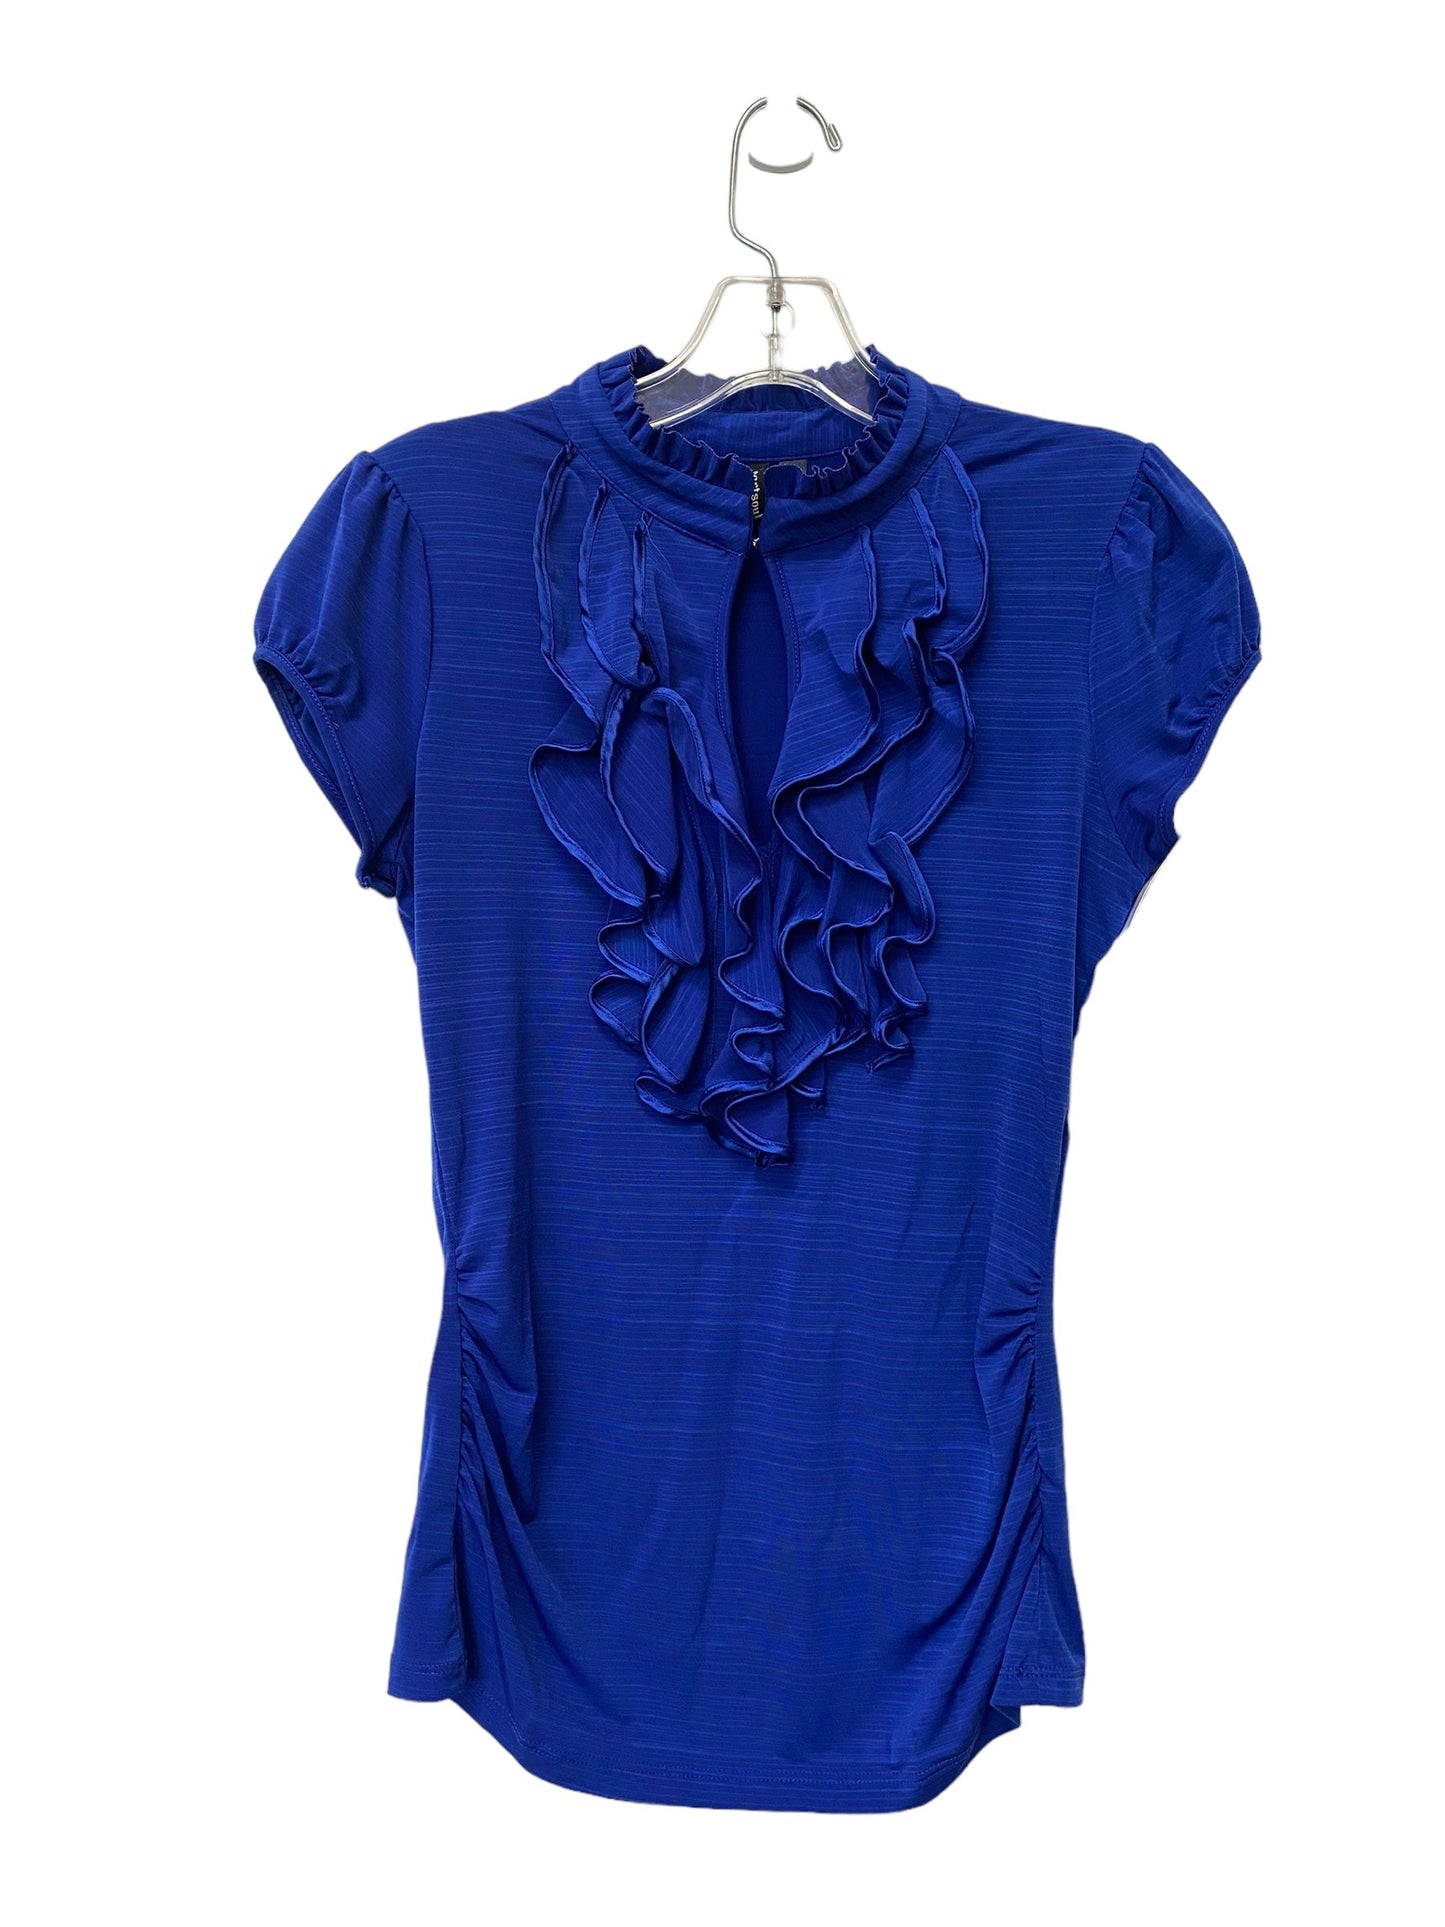 Blue Top Sleeveless Clothes Mentor, Size S